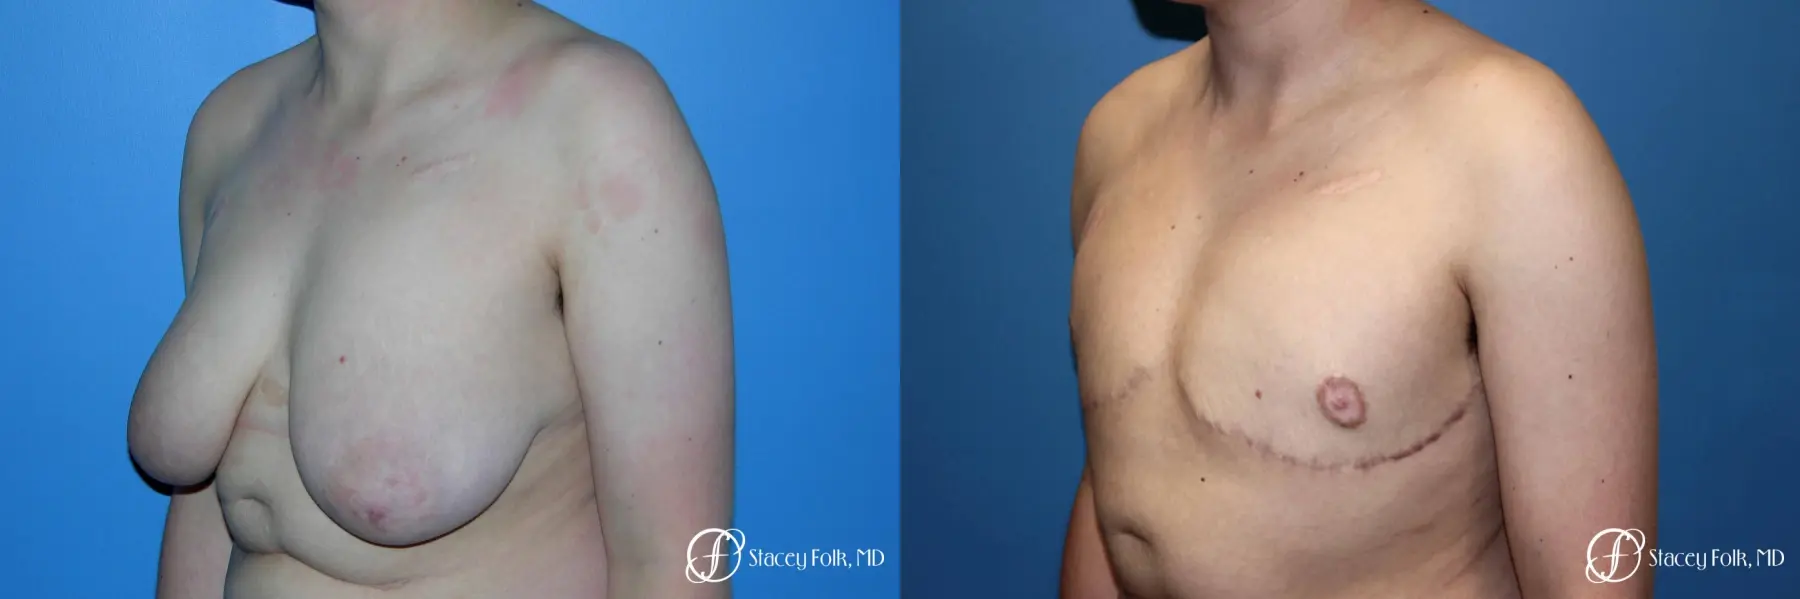 Denver Female to Male Top Surgery 5257 - Before and After 4